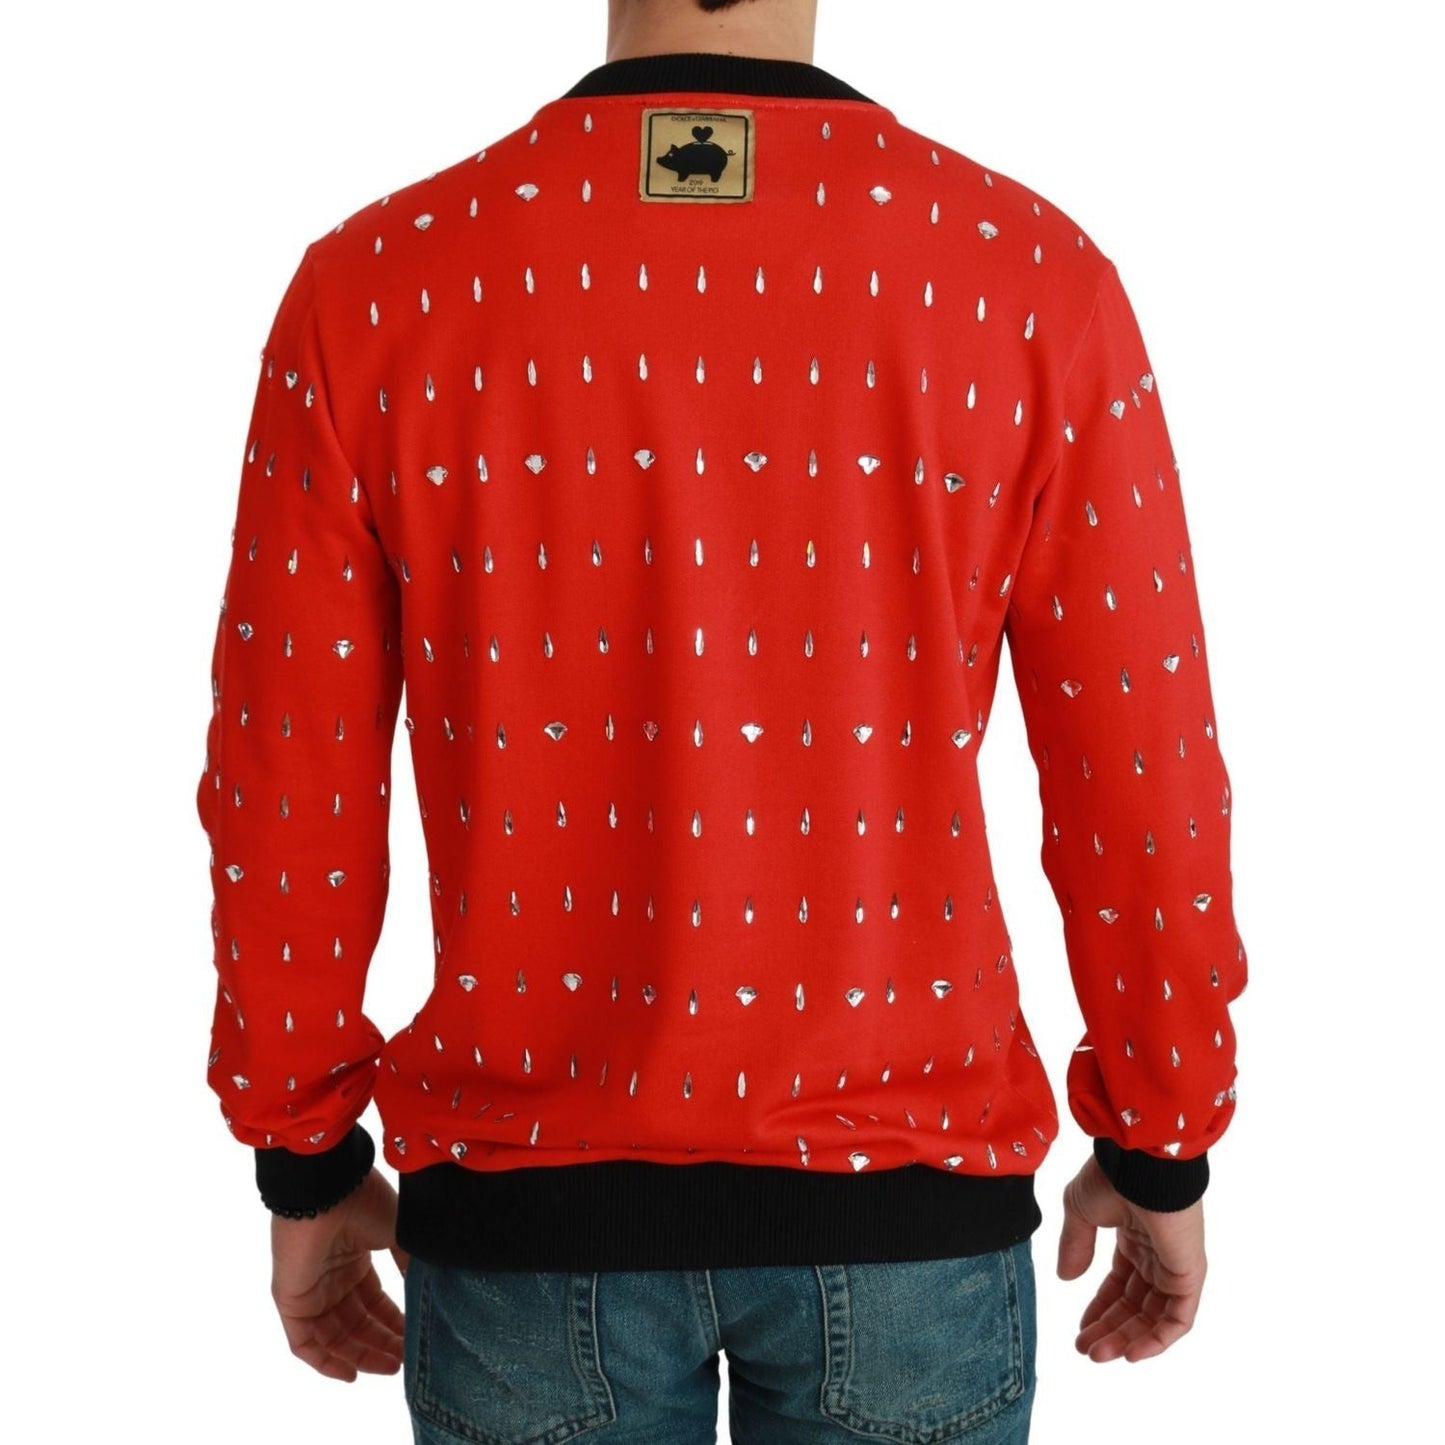 Dolce & Gabbana | Red Crystal Pig of the Year Sweater | McRichard Designer Brands